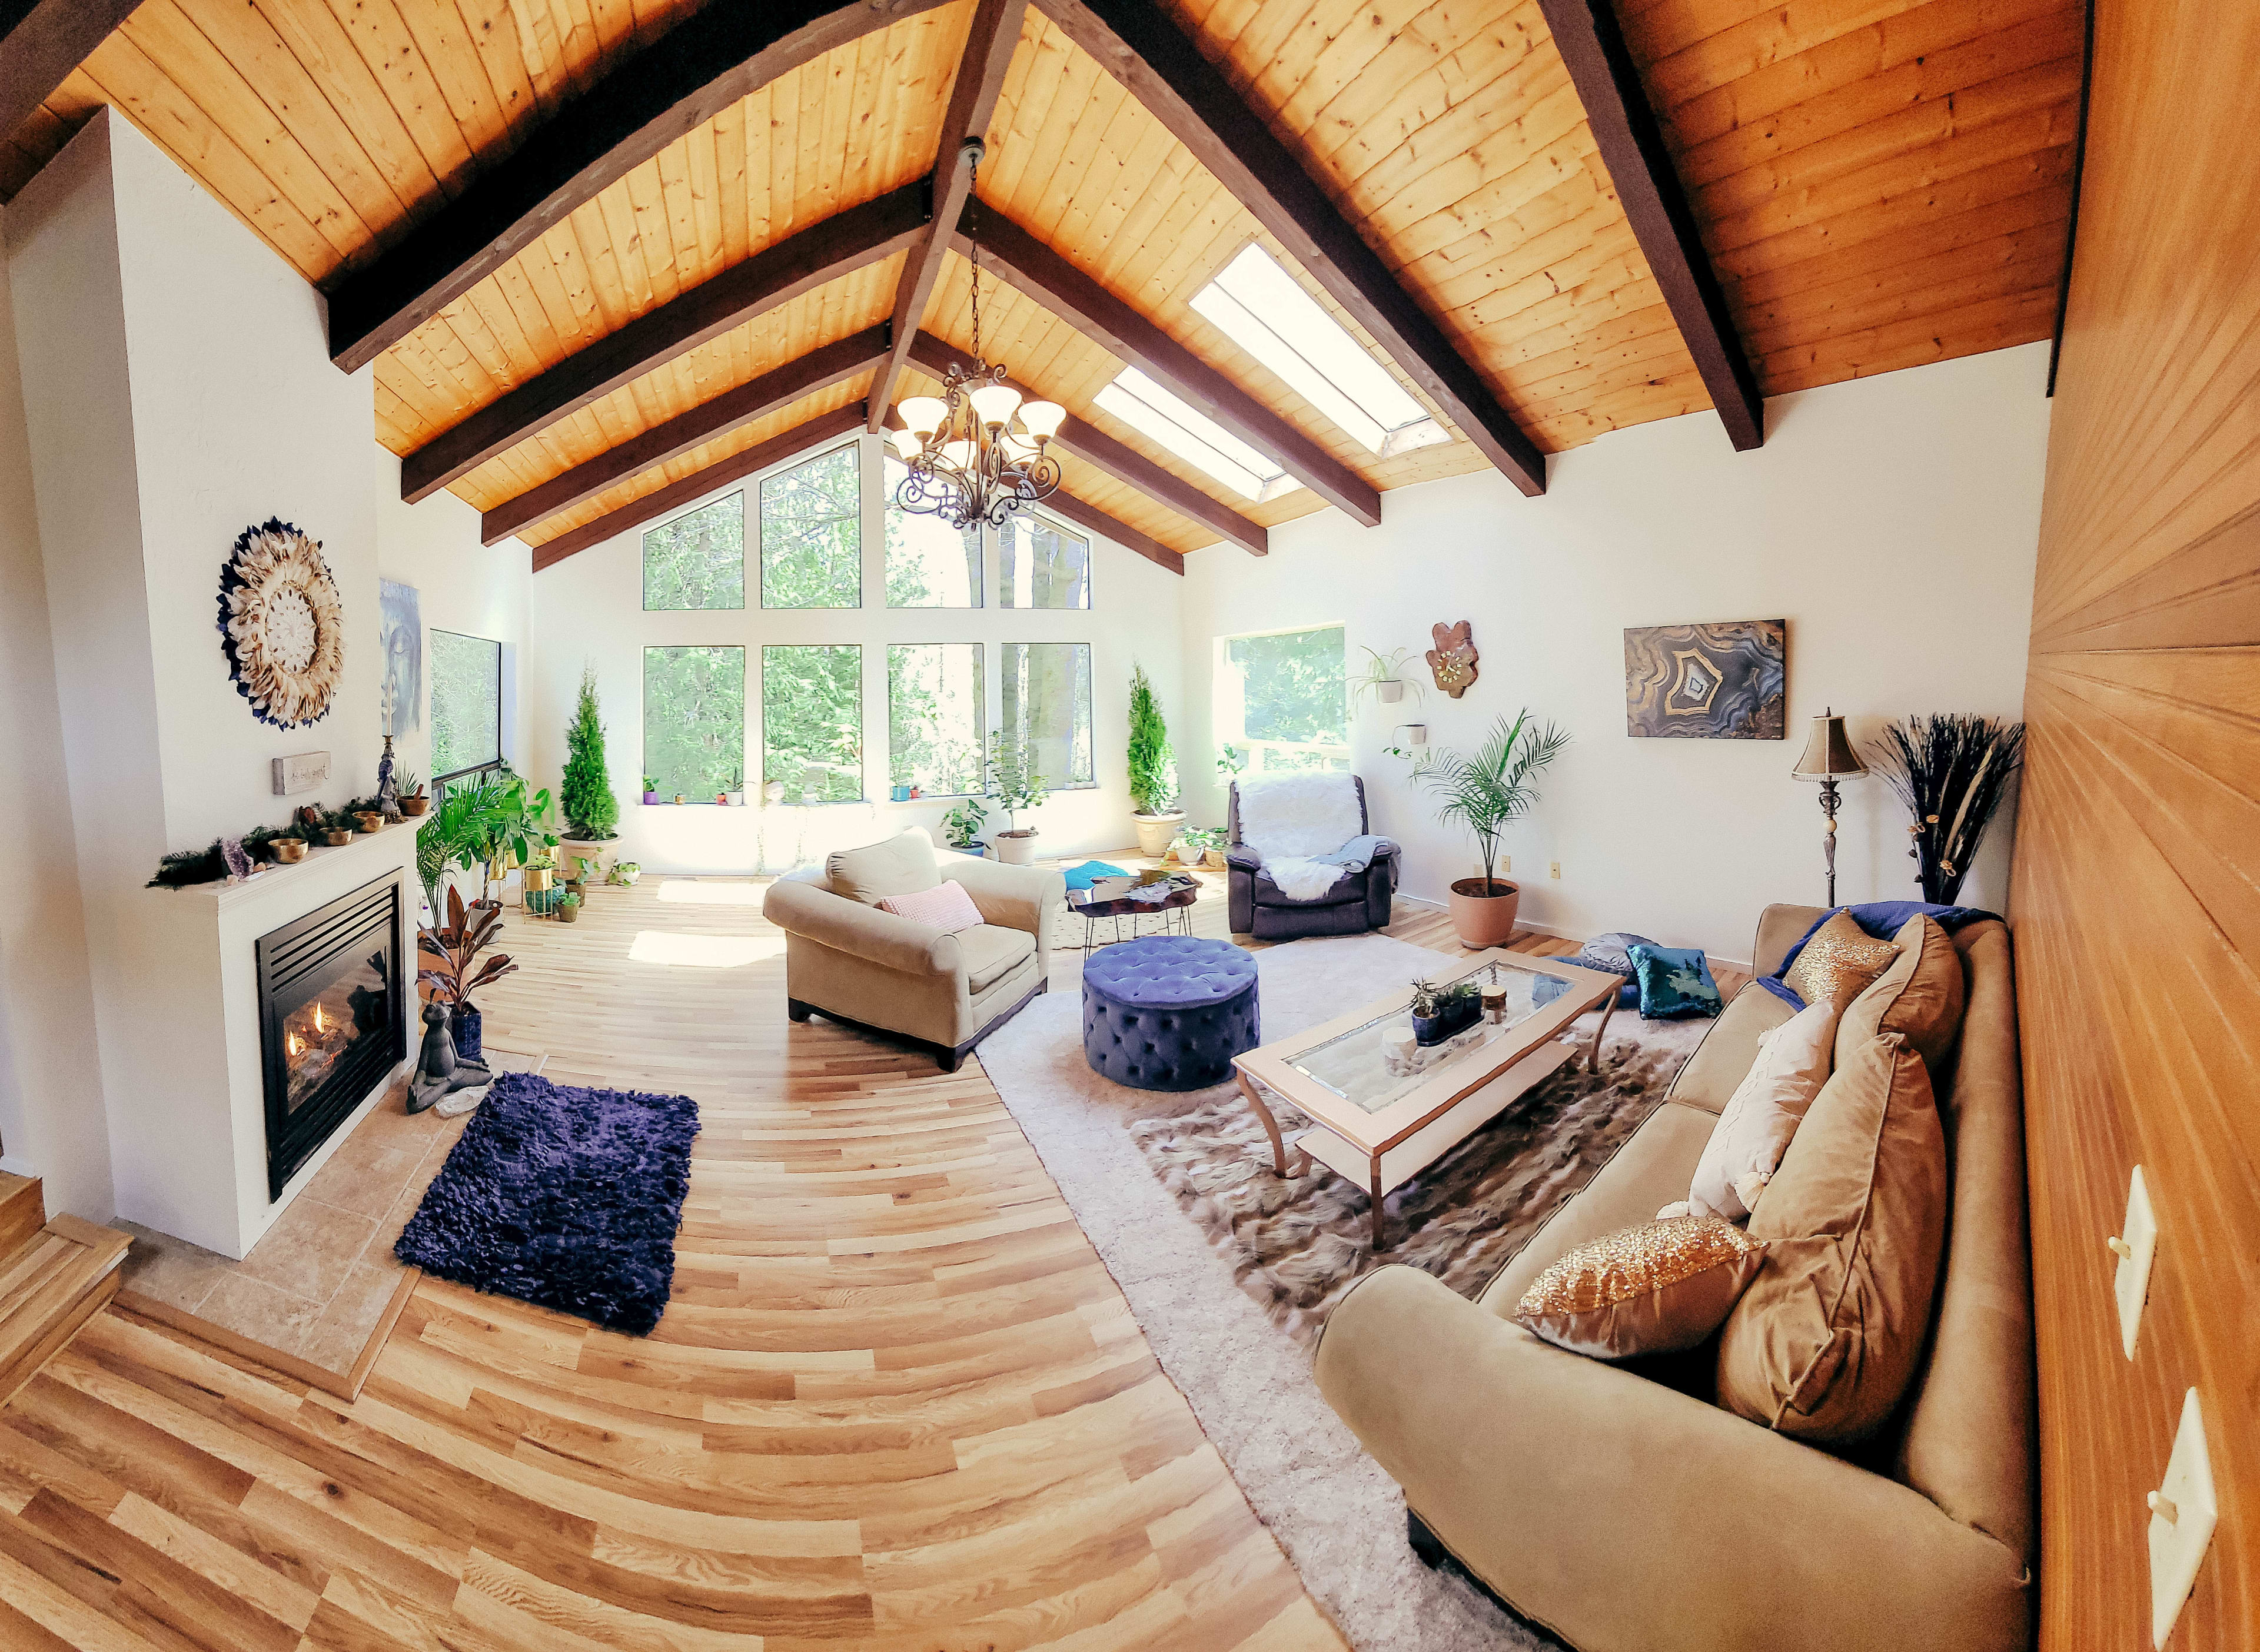 Great Room Sanctuary with forest views! Skylights, indoor trees, plants, meditation space, propane fireplace, singing bowls, and a custom crystal embedded redwood table!